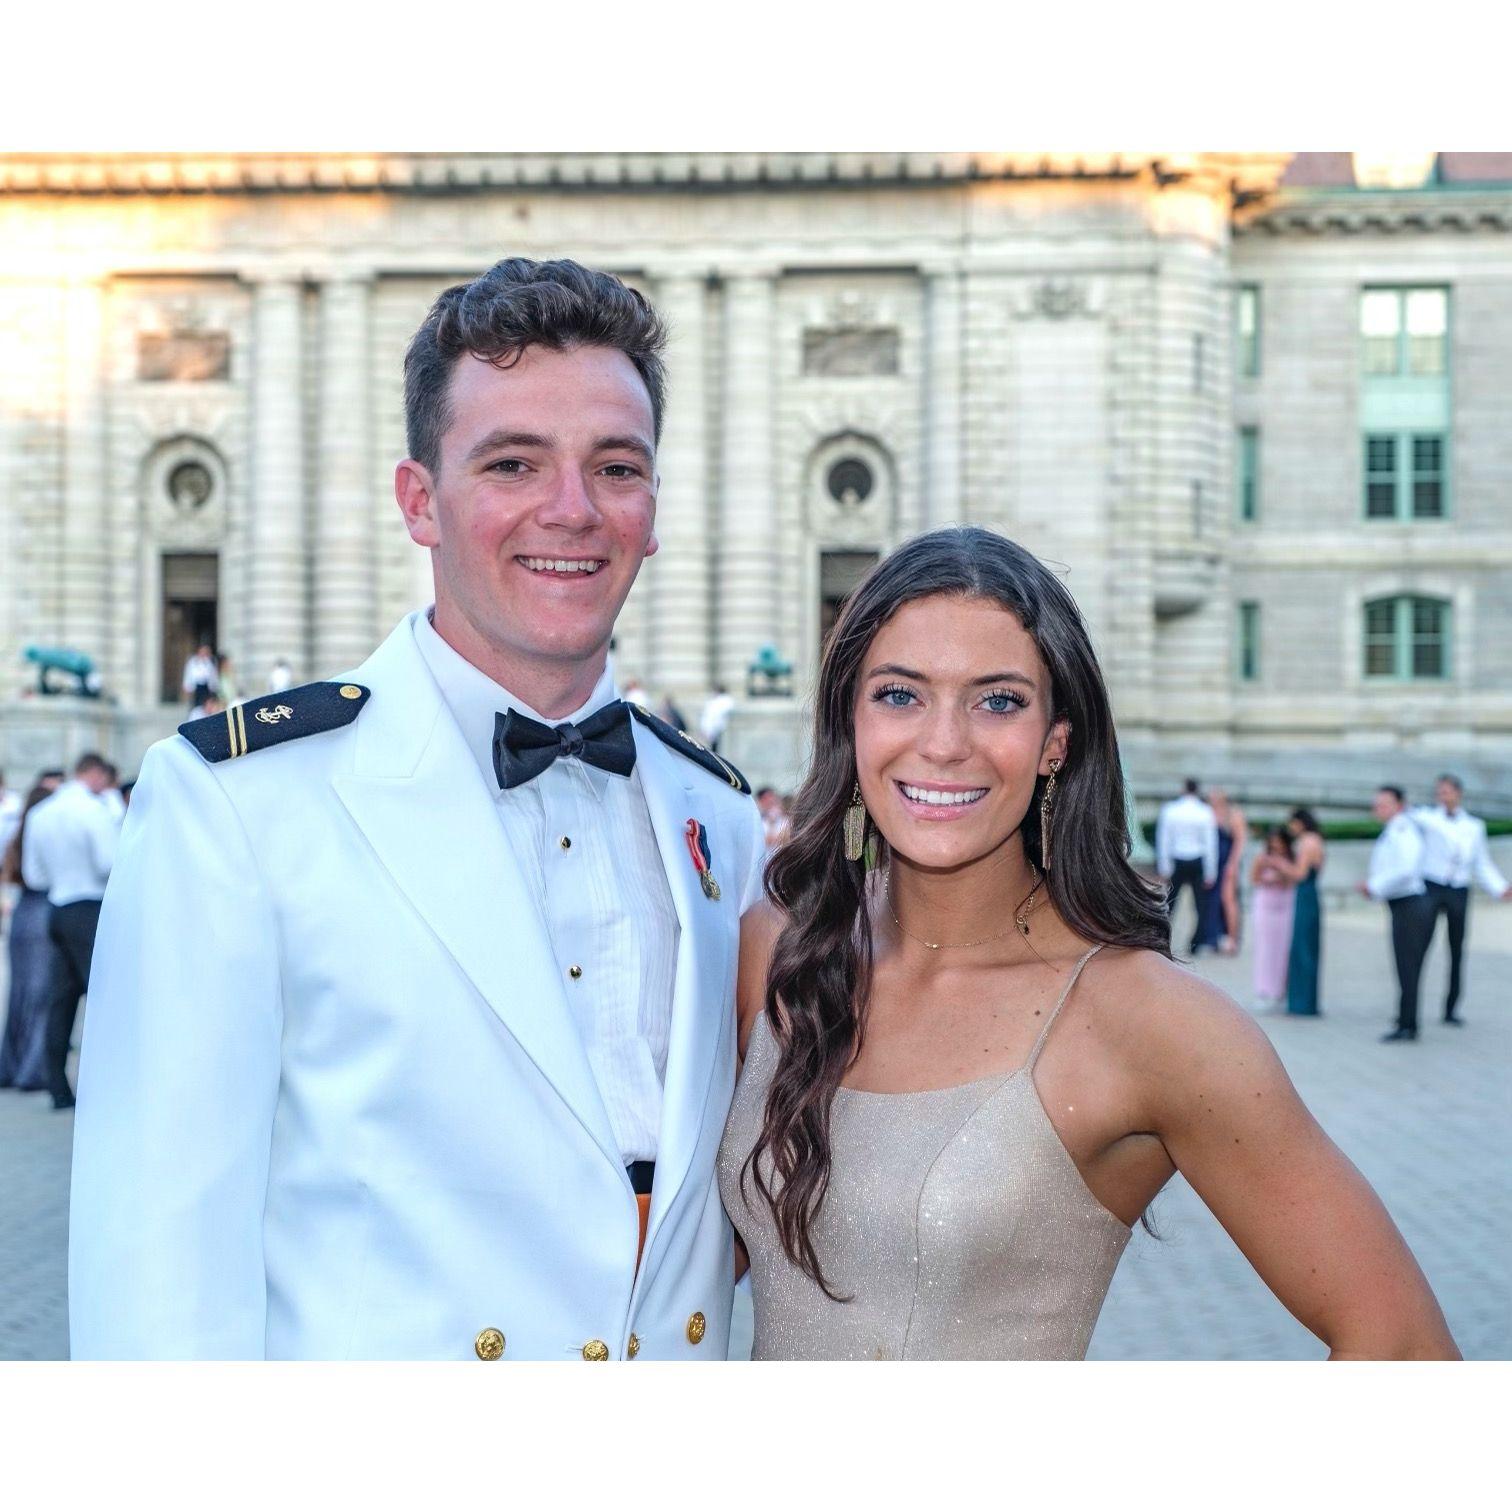 Ring dance at the Naval Academy! This was after our 2/C (junior) year where midshipmen dip their class rings in water from the seven seas